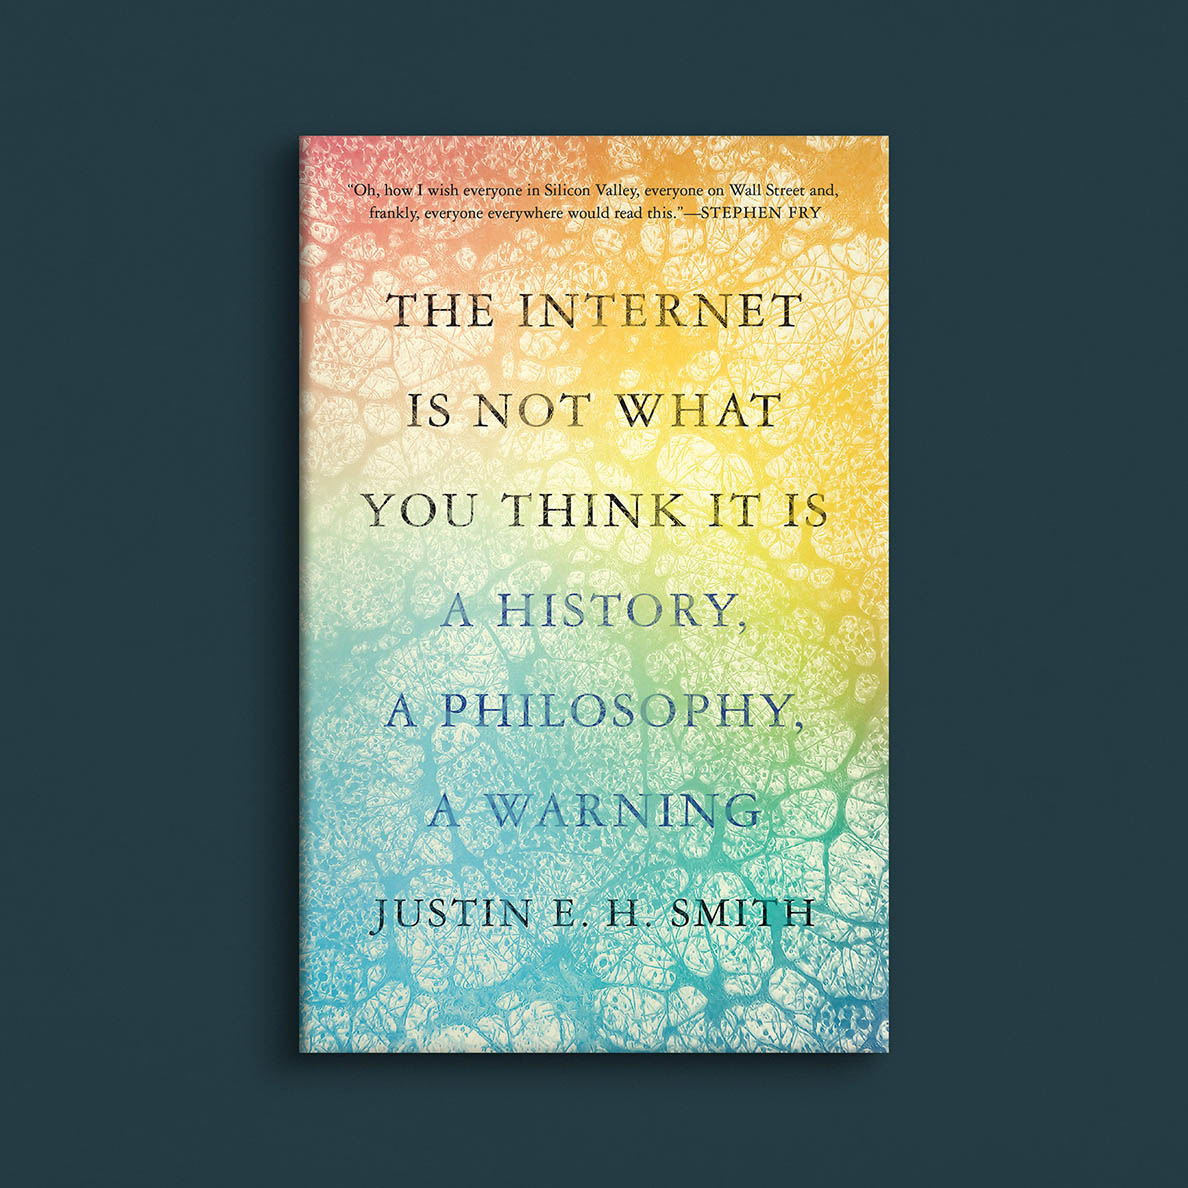 The Internet Is Not What You Think book cover